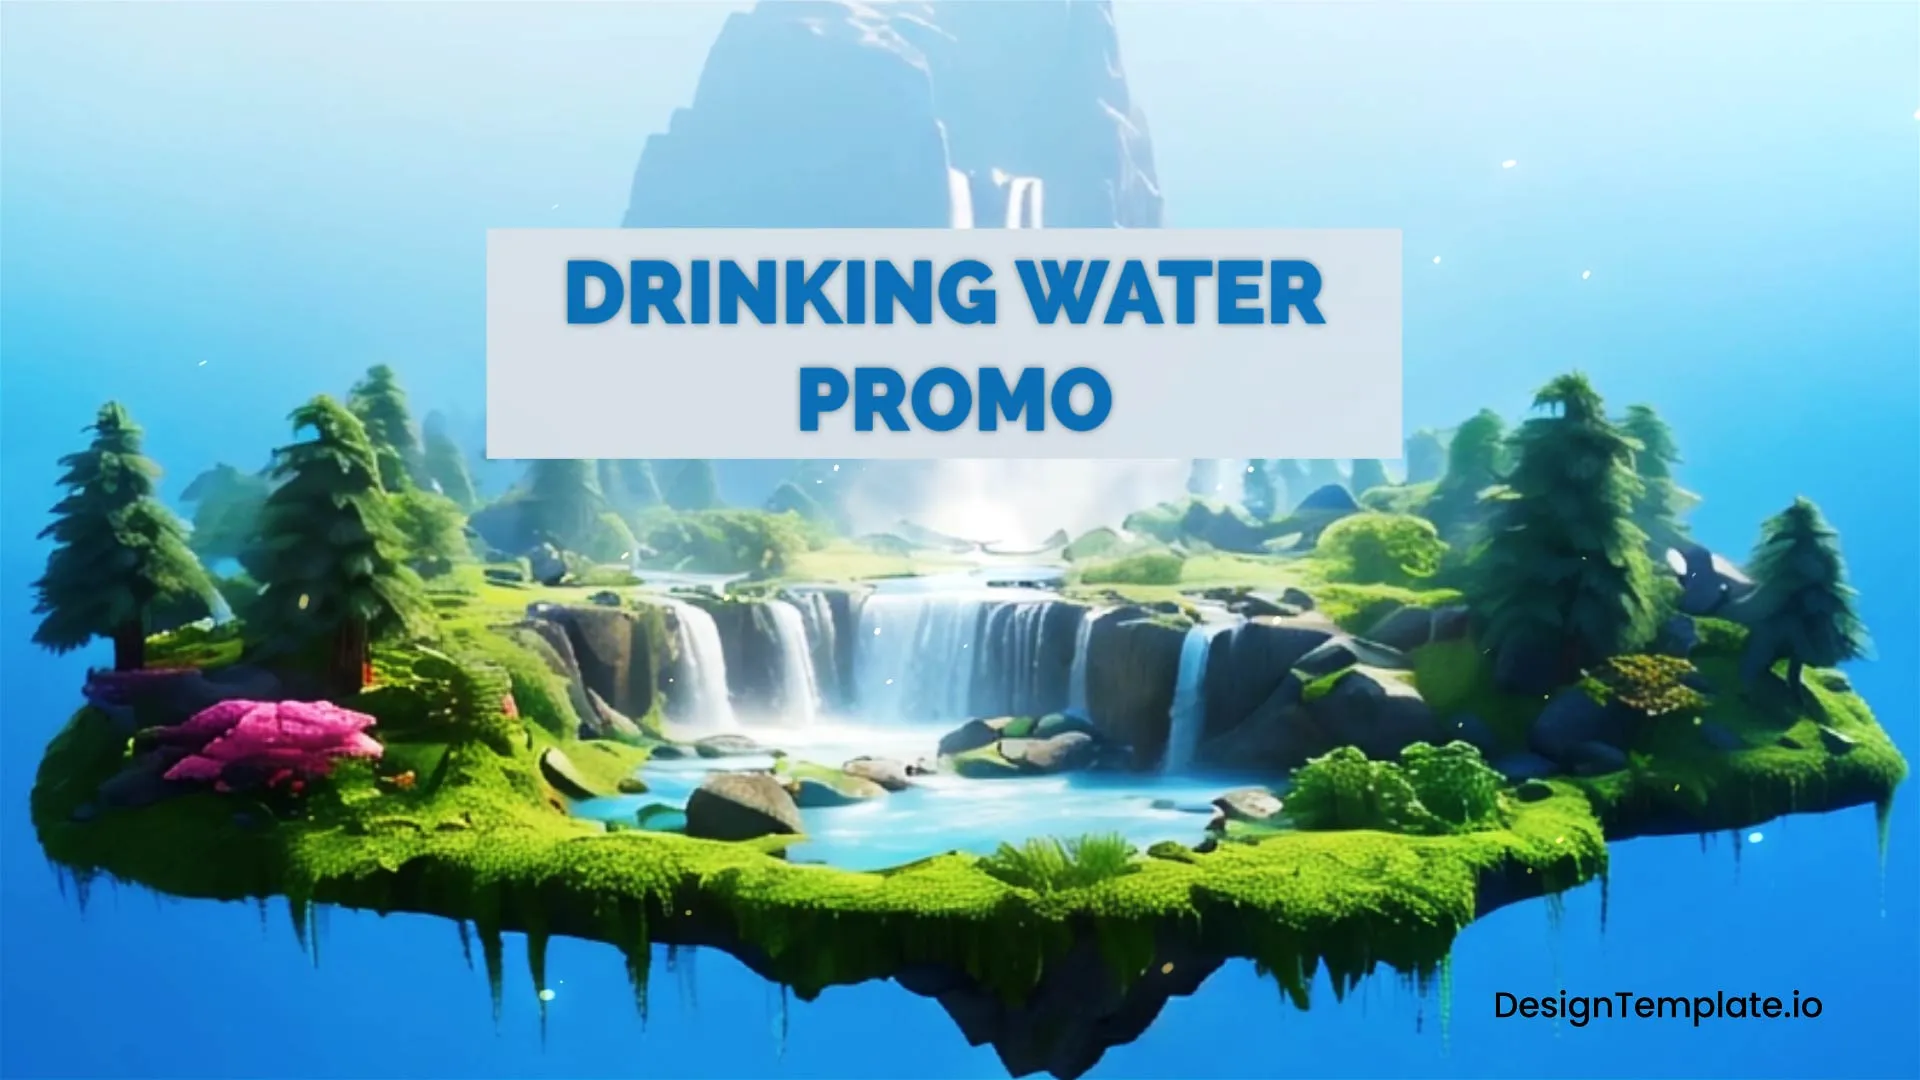 Pure Essence The Ultimate Drinking Water Experience Video